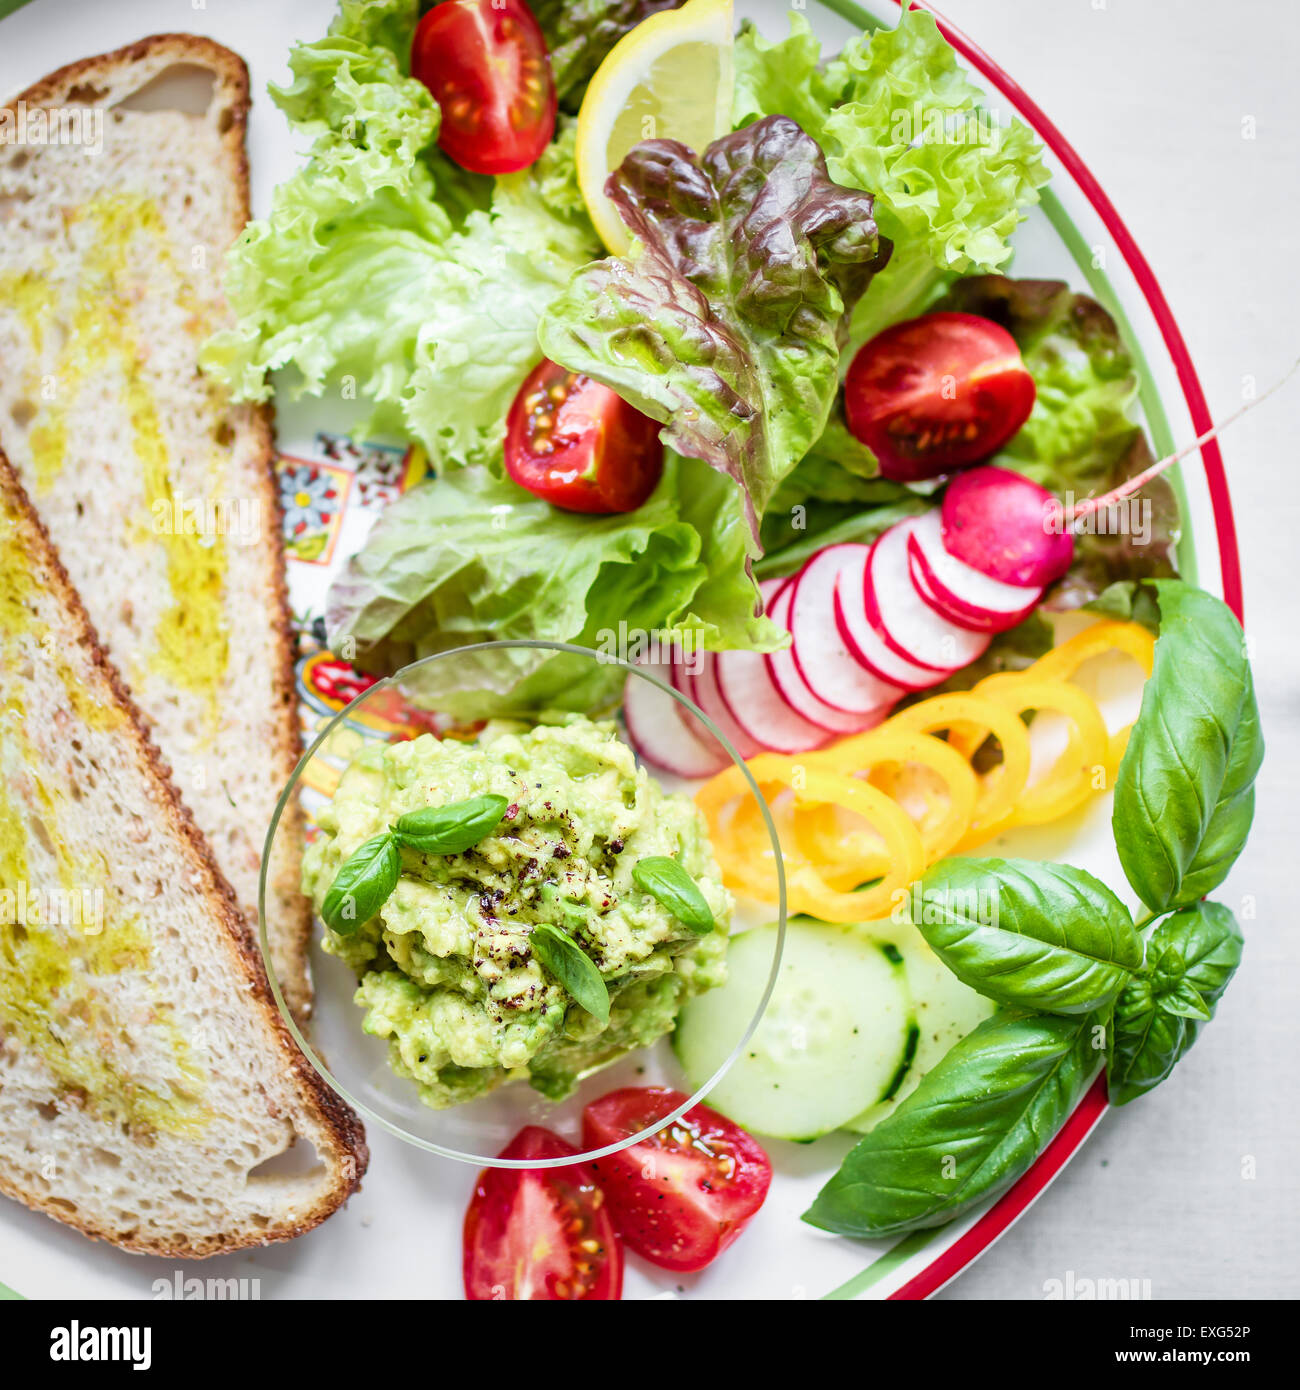 Plate with bread and fresh vegetables for vegan breakfast/lunch. Top view. Stock Photo